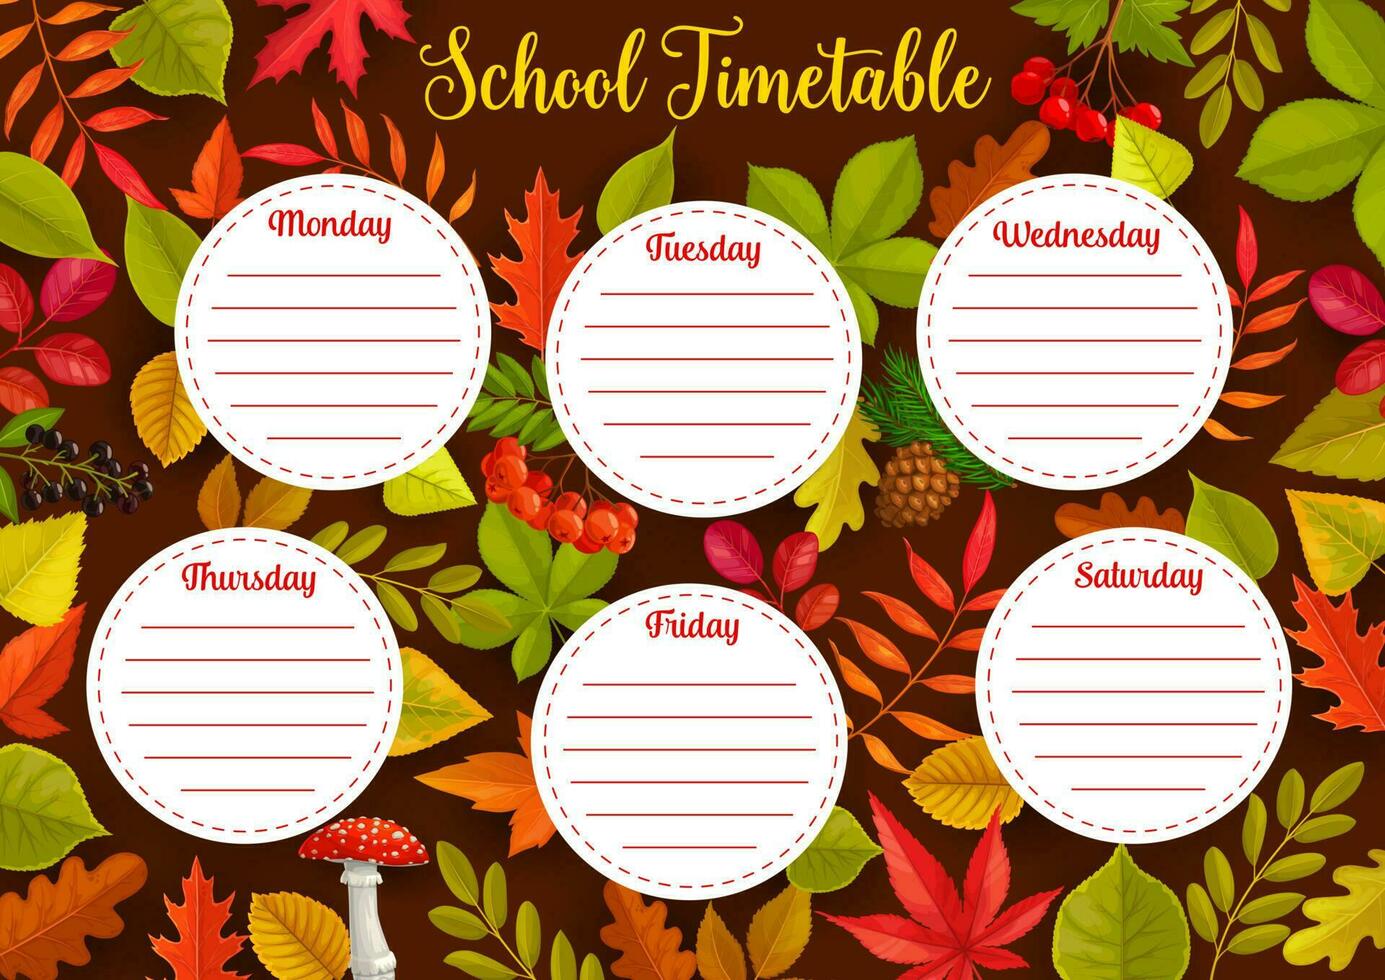 Education school timetable with autumn leaves vector